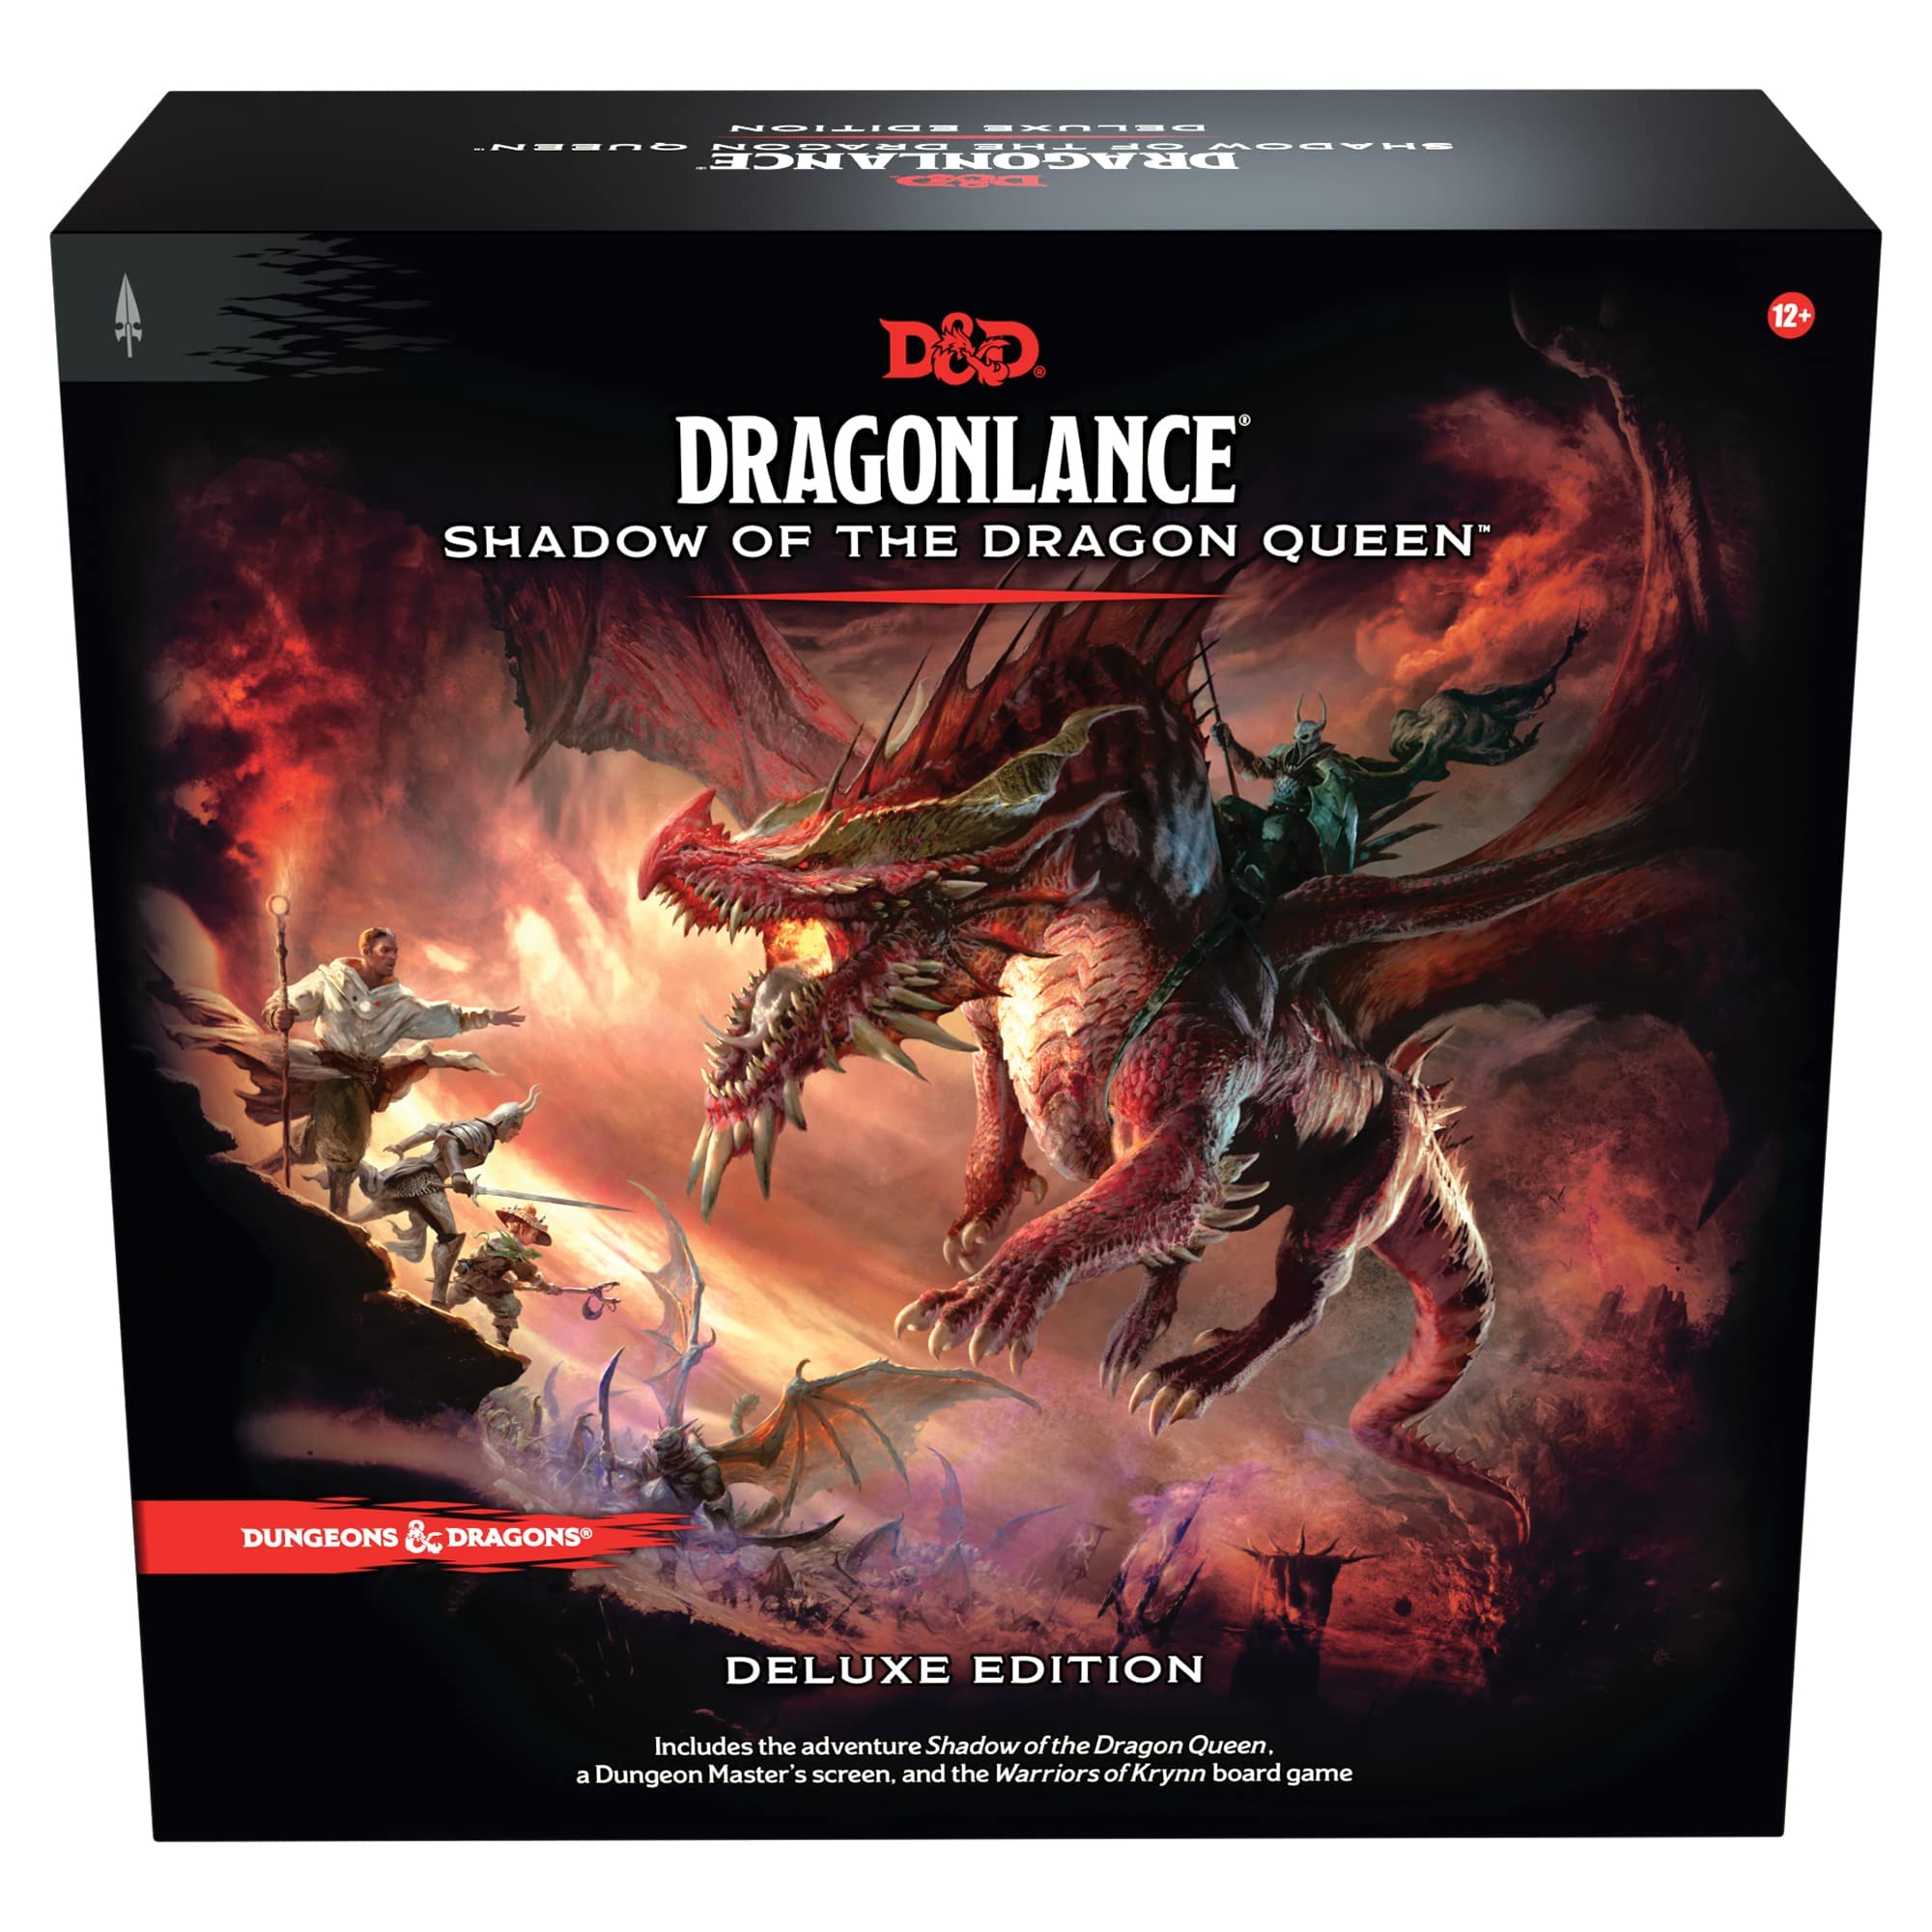 Dungeons and Dragons Dragonlance: Shadow of The Dragon Queen Deluxe Edition (D&D Adventure, DM Screen + Warriors of Krynn Board Game) (D09880000)